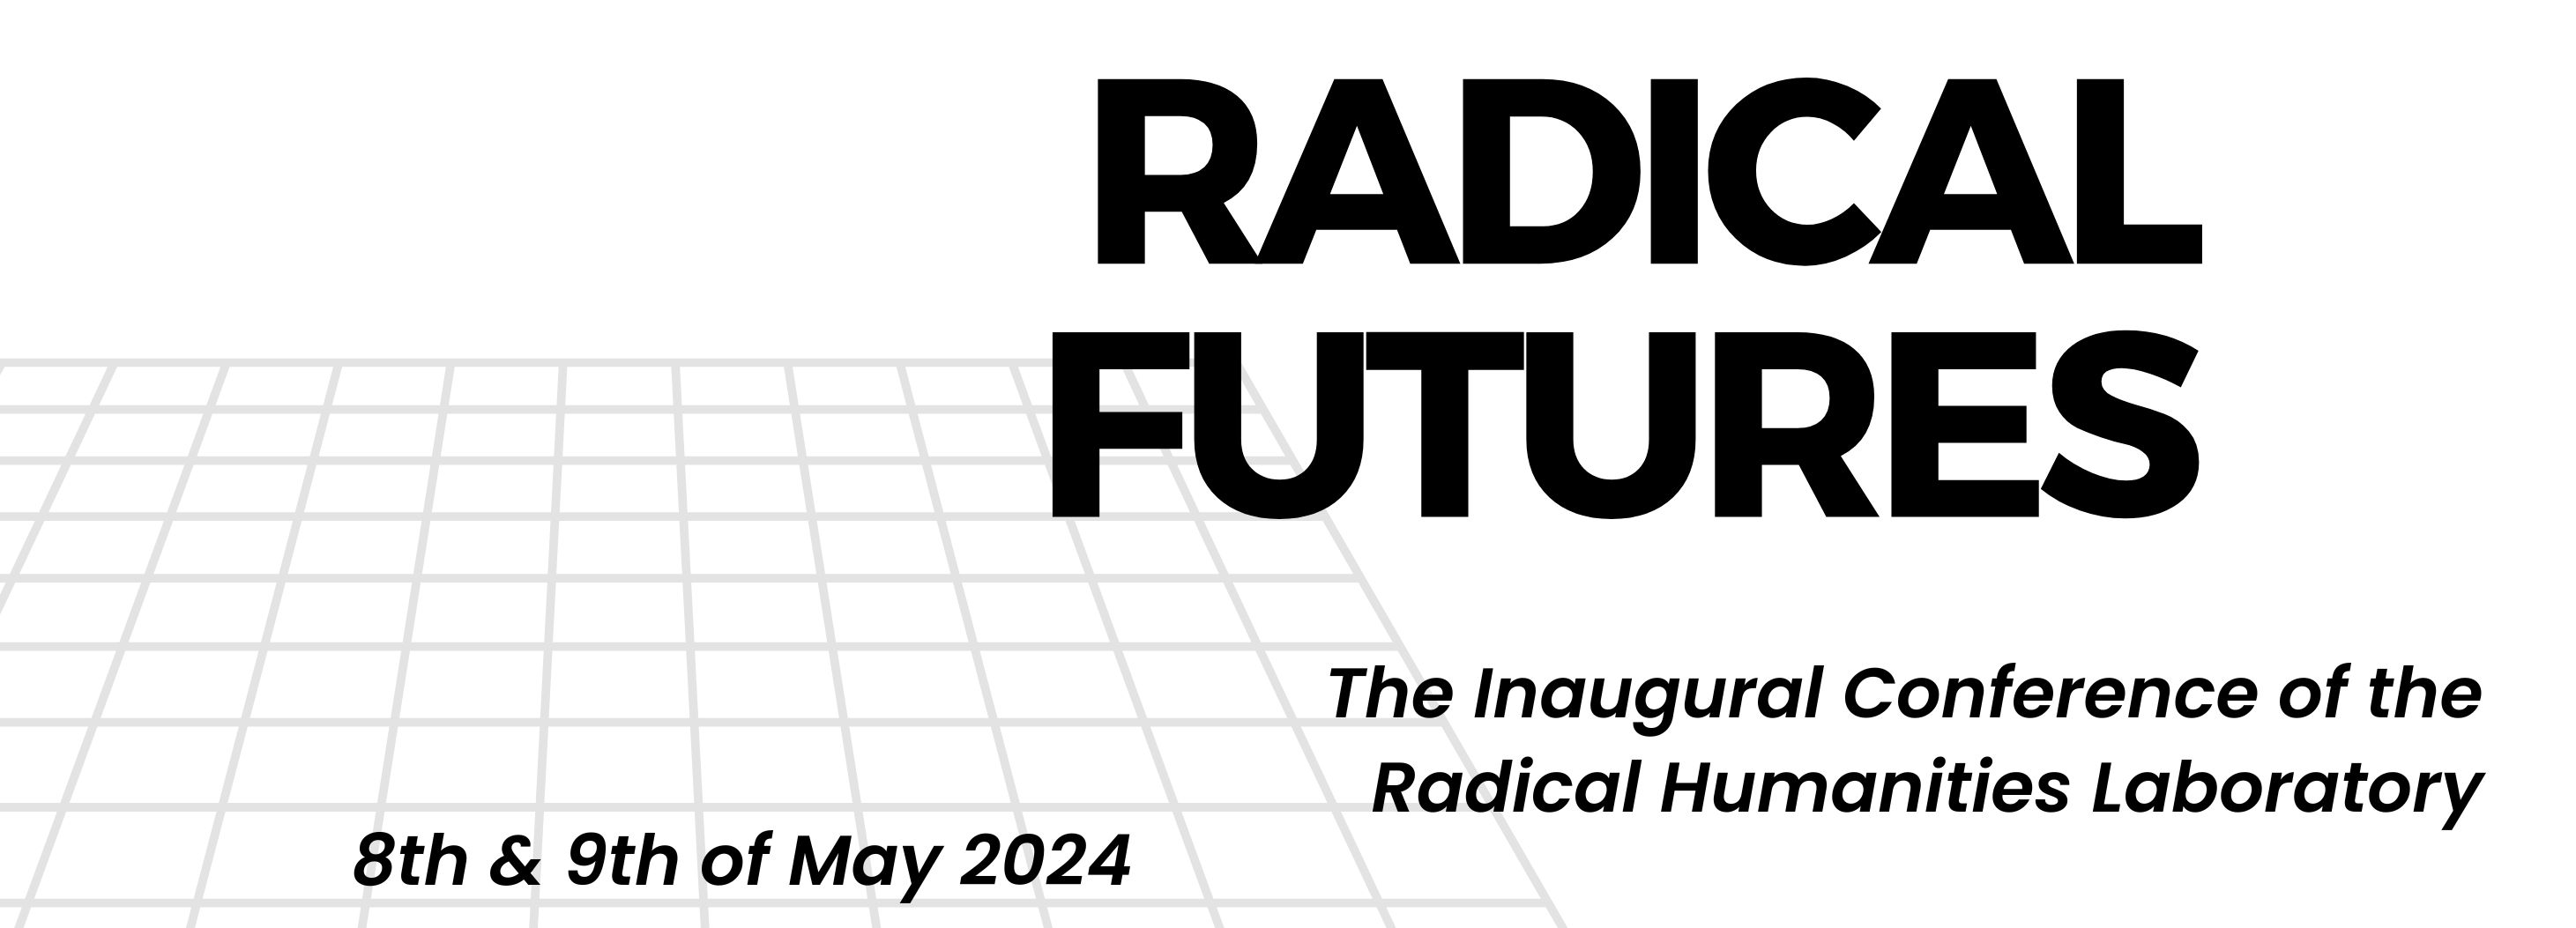 Radical Humanities Lab launches its inaugural conference